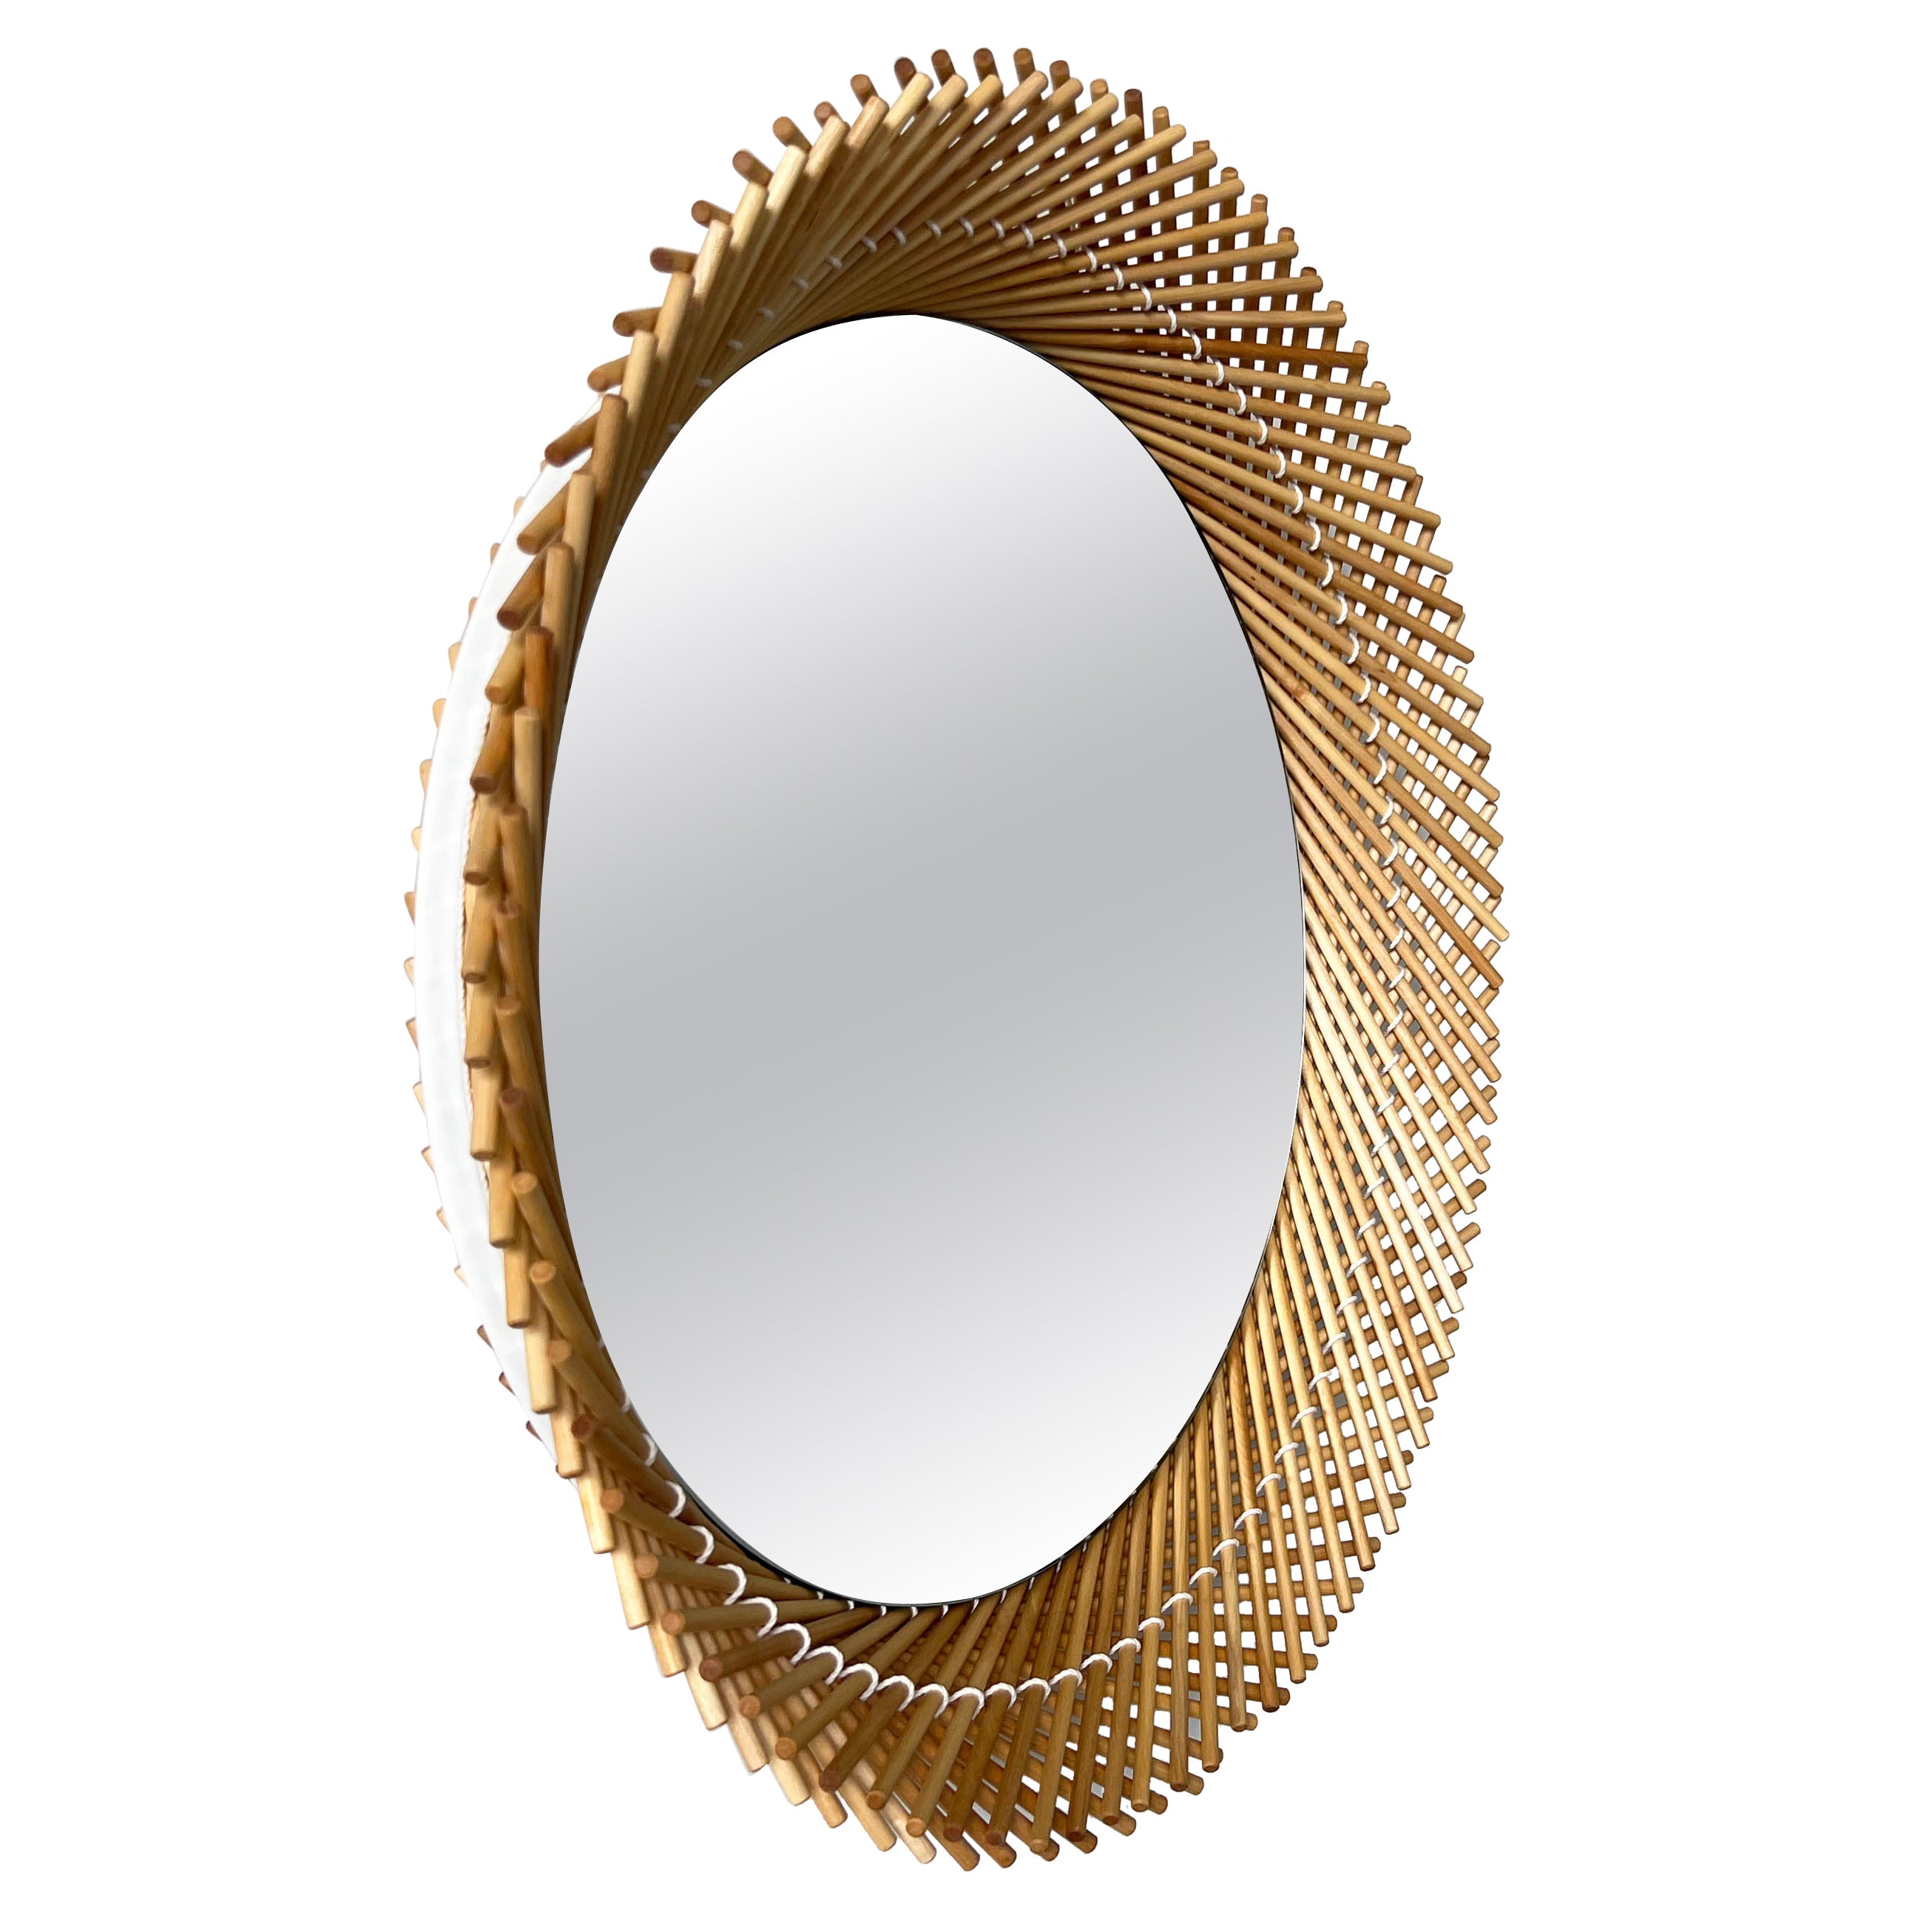 Mooda Mirror Round 18 / Natural Maple Wood, Clear Mirror by INDO- For Sale